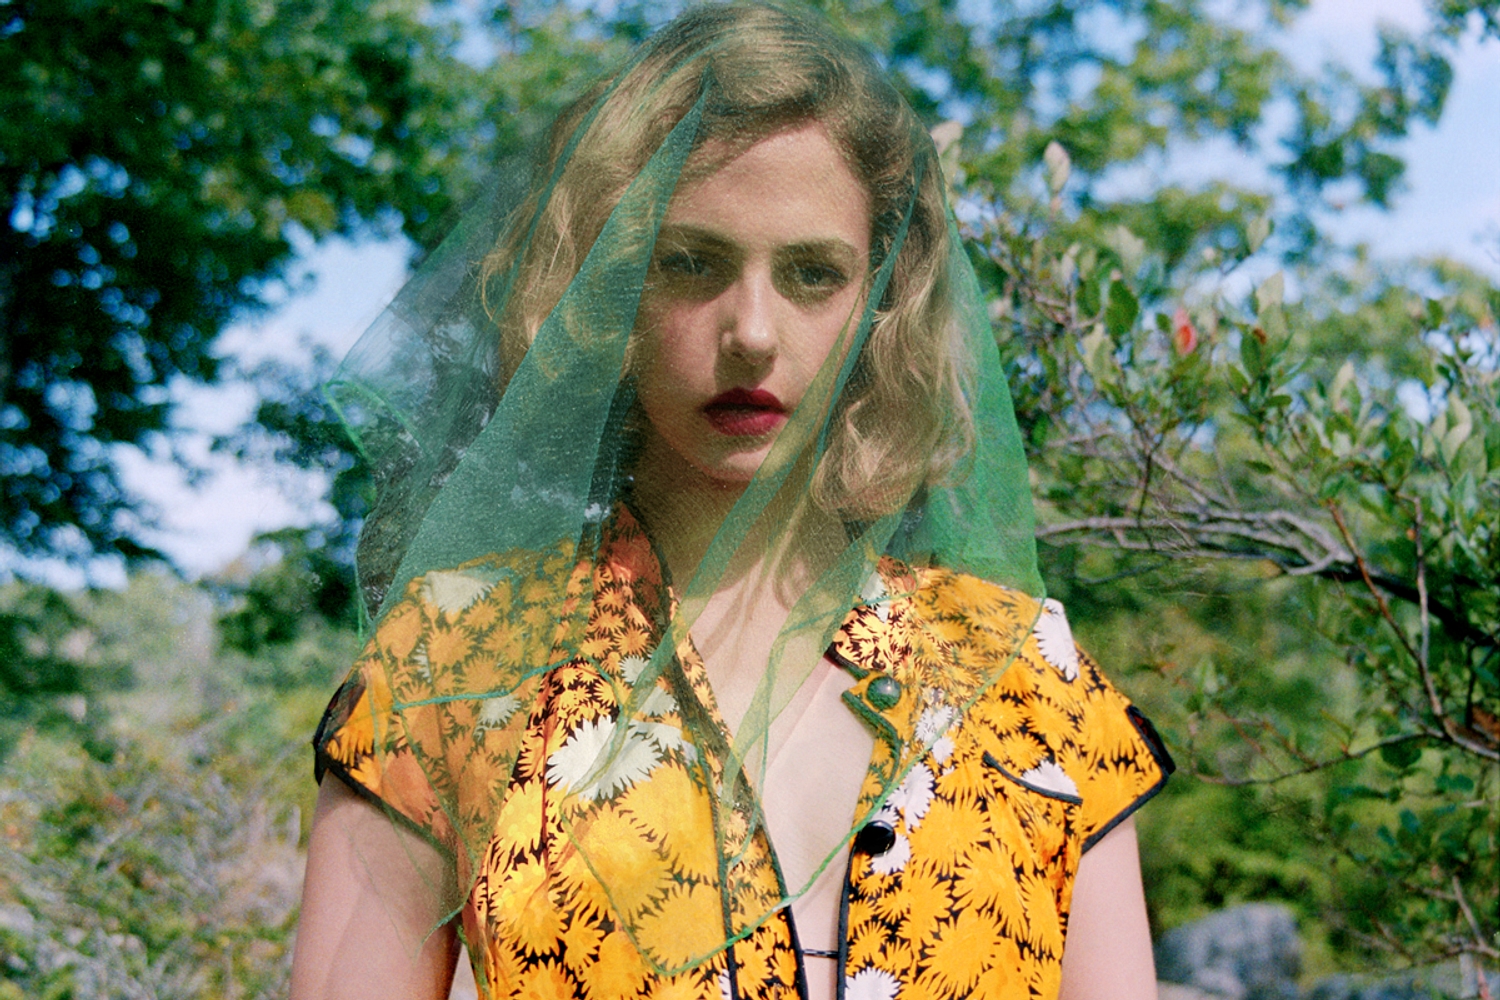 Hannah Cohen gets real with new ‘Fake It’ track